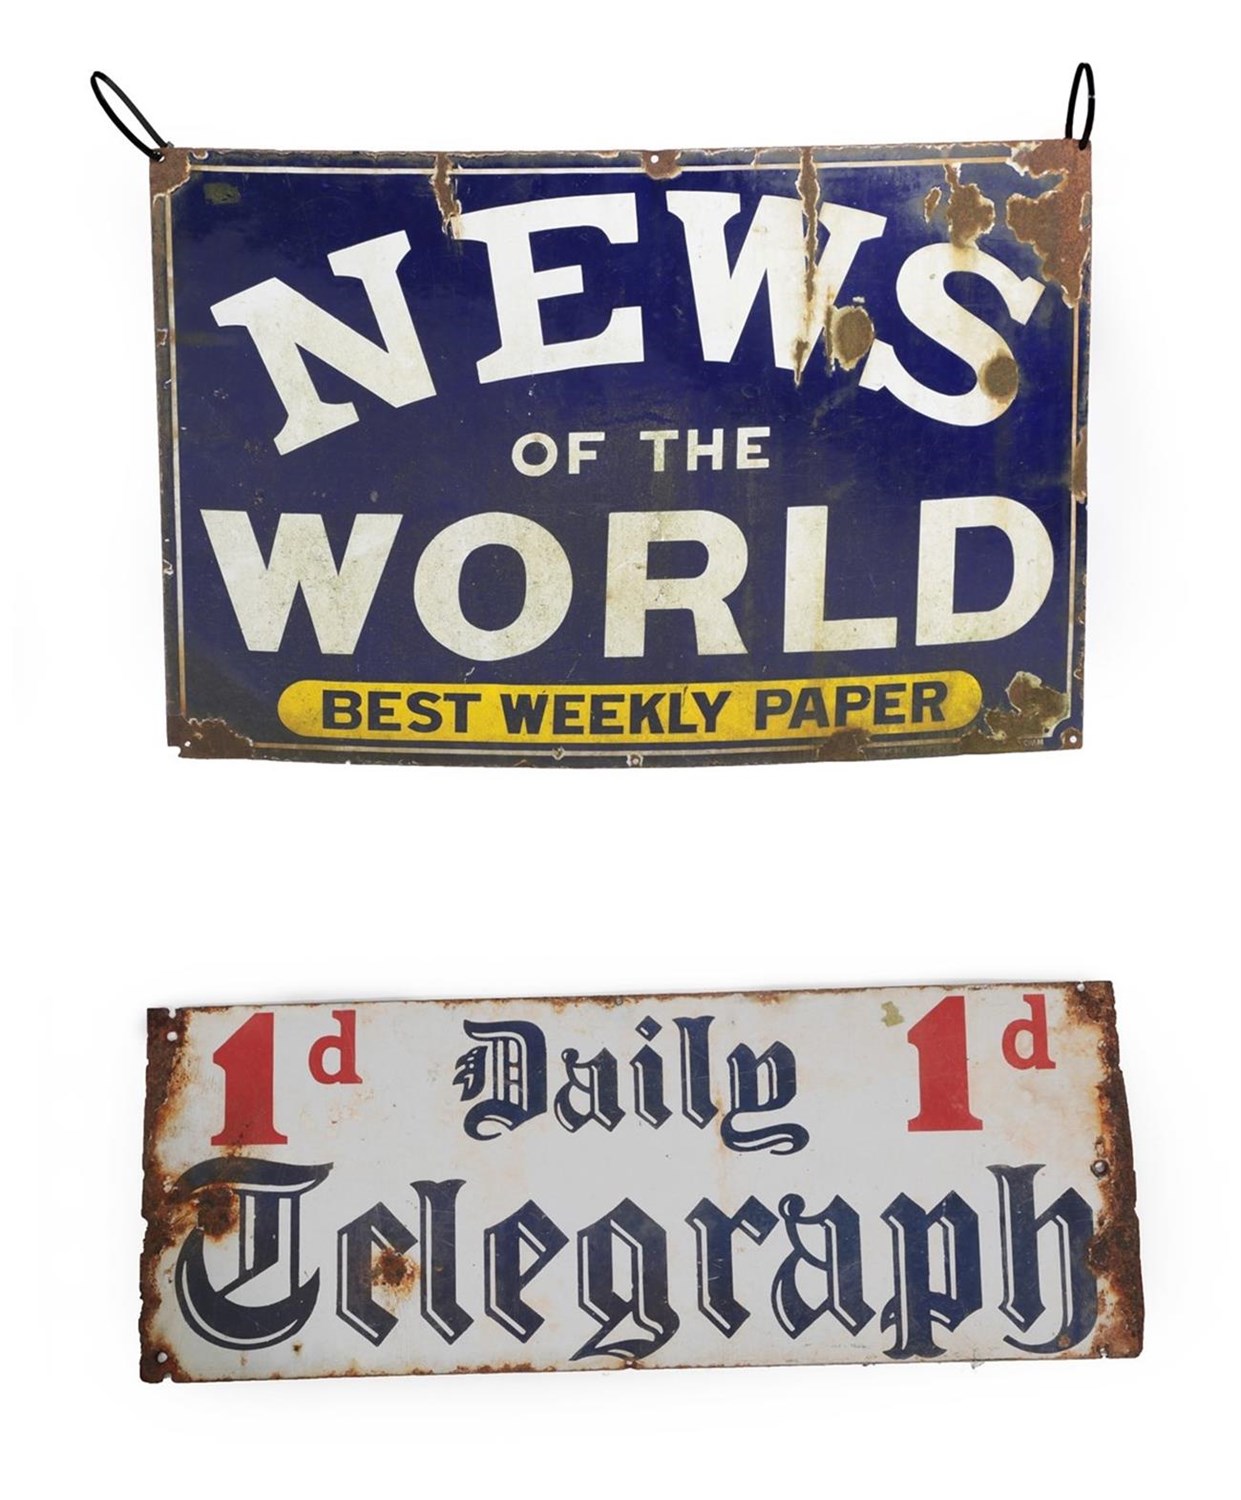 Lot 296 - An Enamelled News of the World Advertising Sign, inscribed NEWS OF THE WORLD BEST WEEKLY PAPER on a